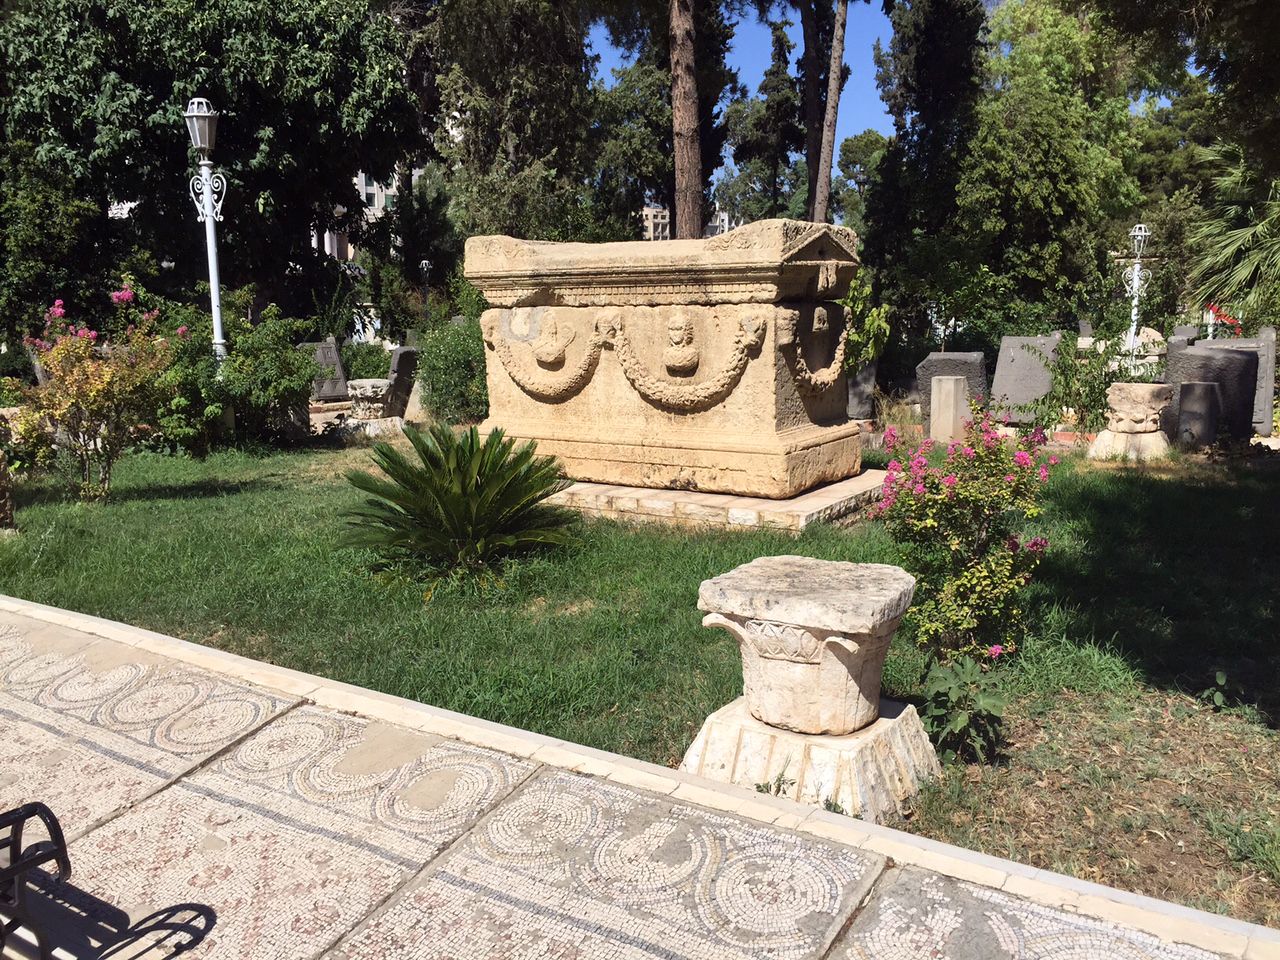 Not all of the sarcophagi have been covered in concrete yet, and the garden has been hit several times by mortar rounds in recent years.